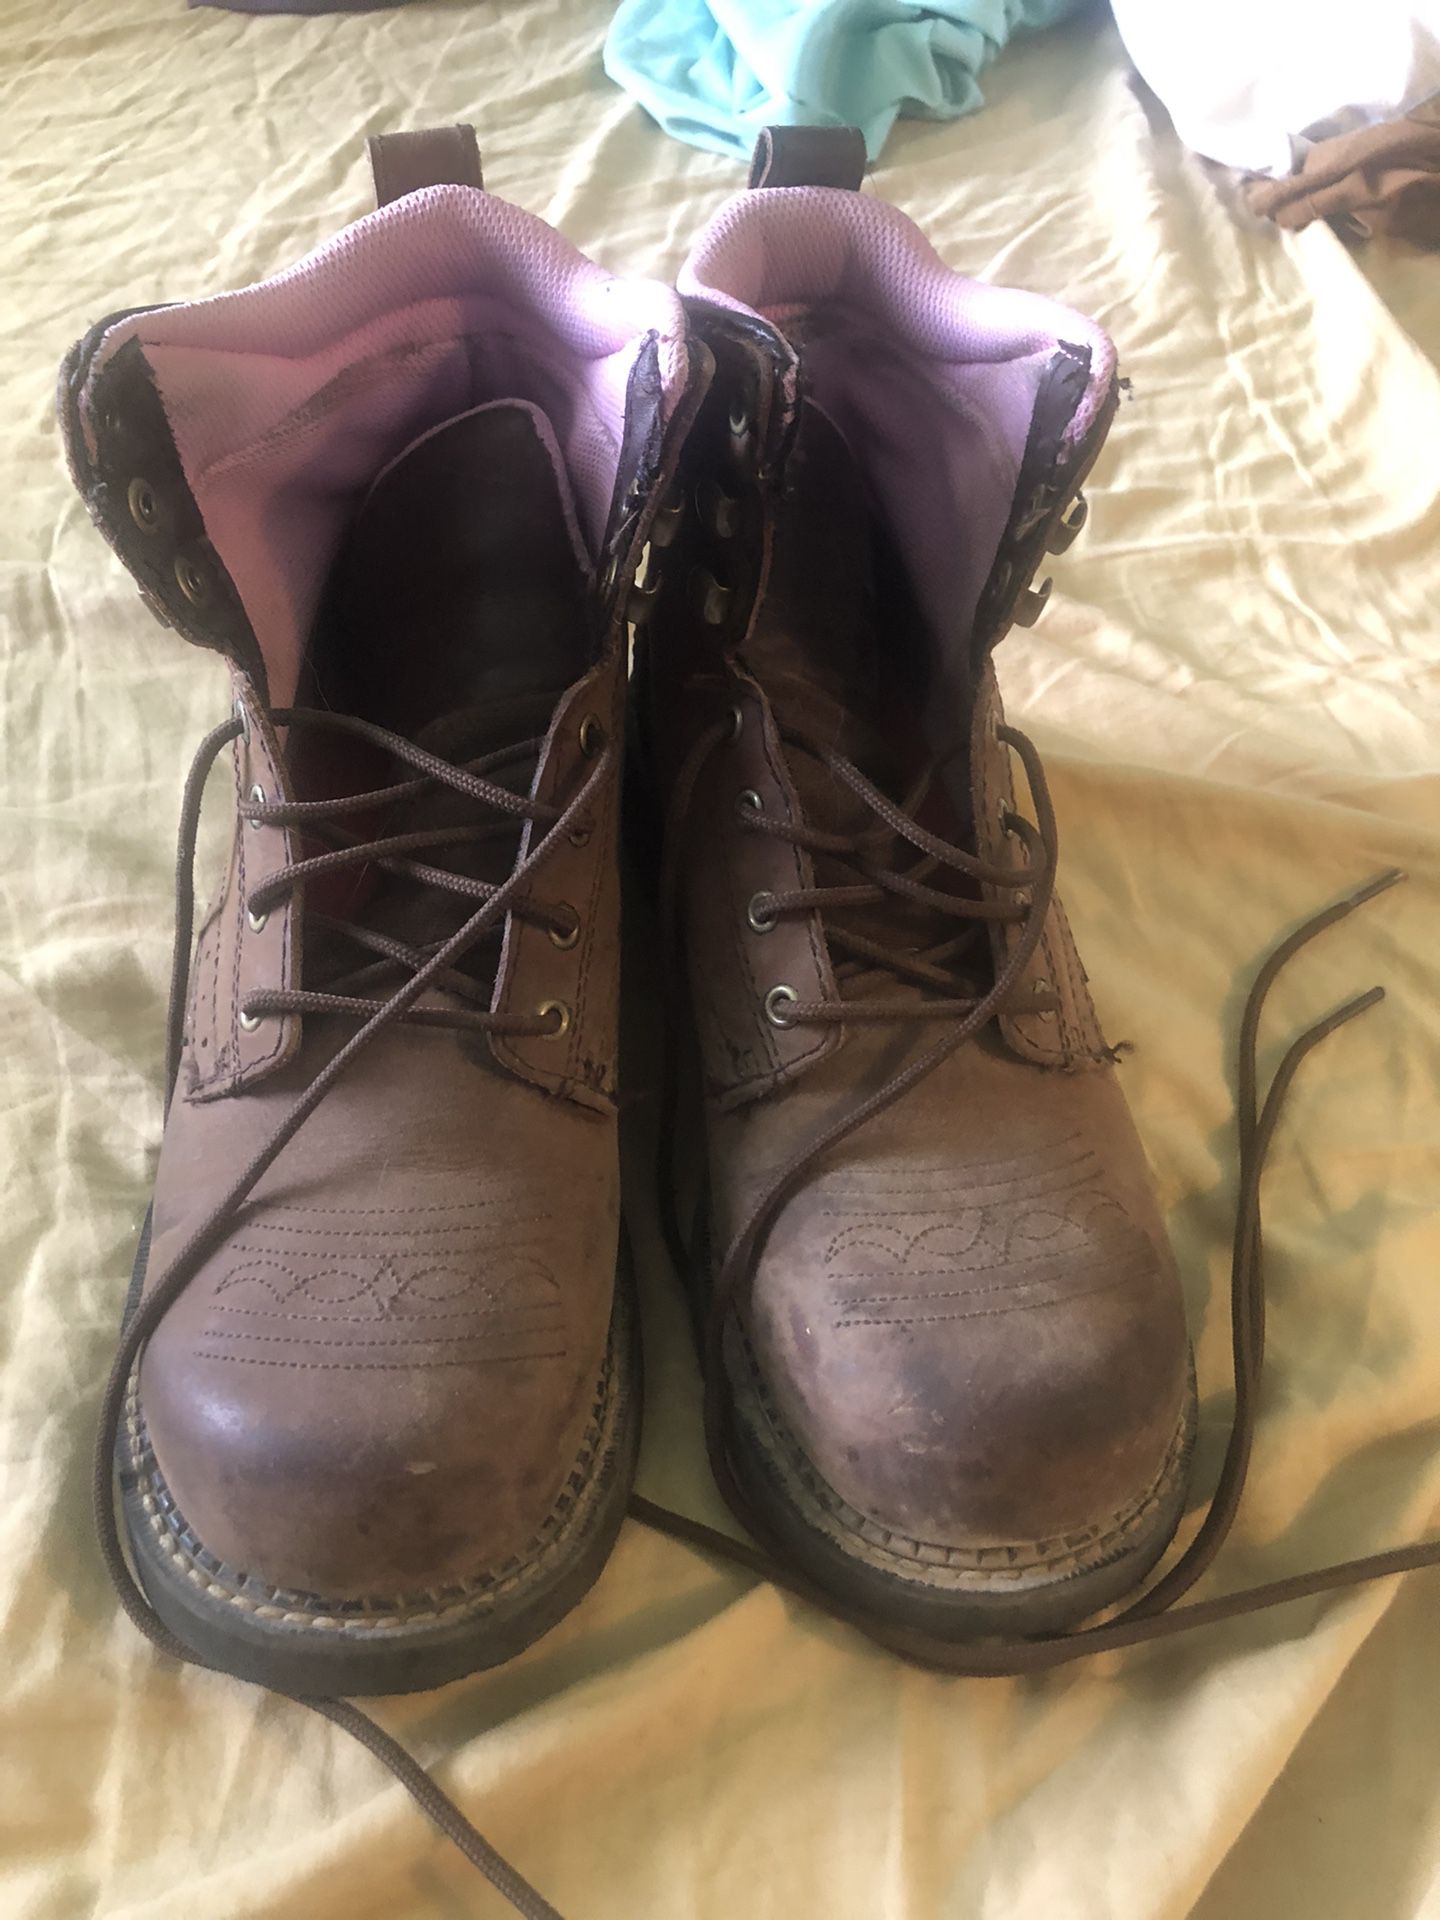 Women’s Justin gypsy Steal toe work boots size 8 1/2B 